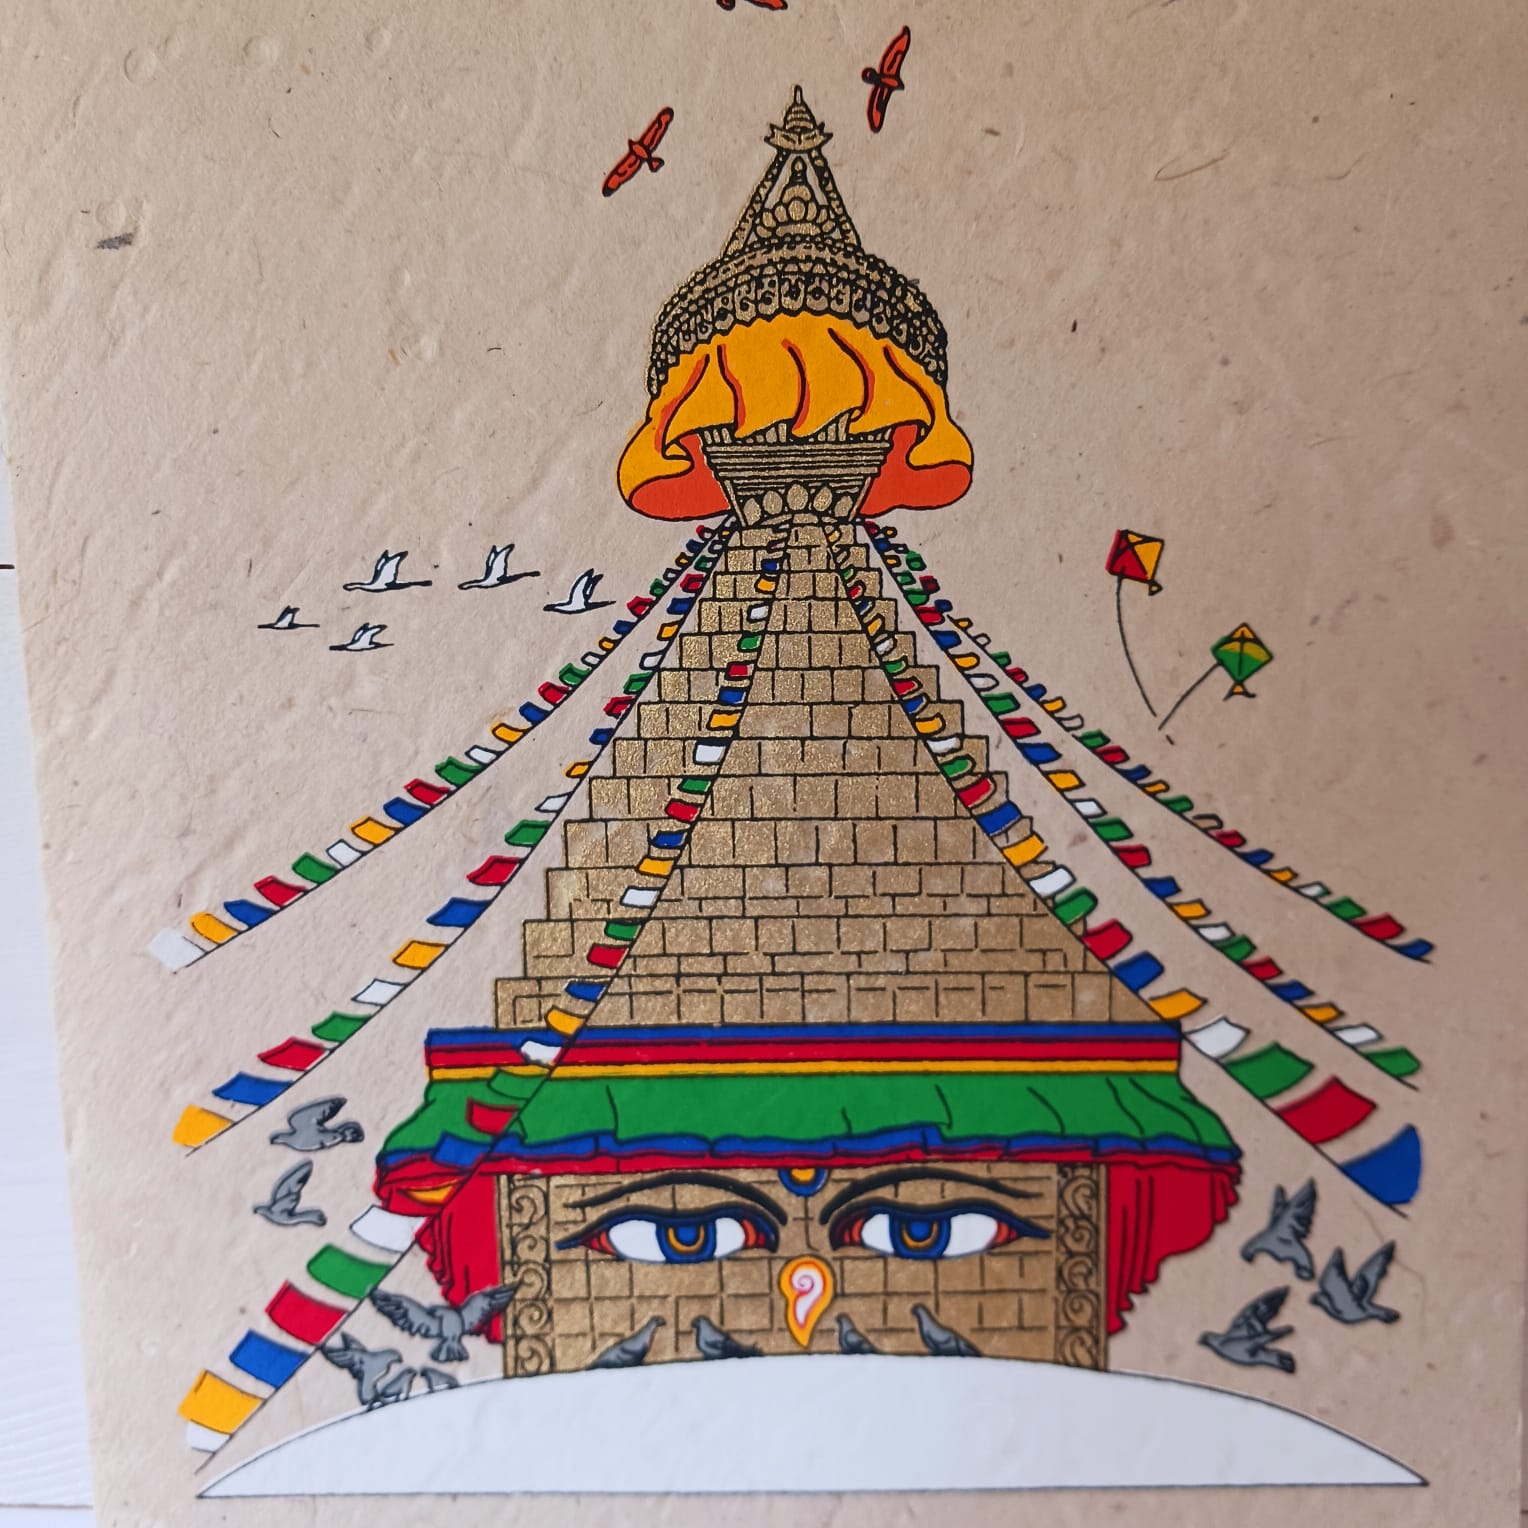 Boudhanath: The Great Stupa | by Quentin Septer | Aug, 2023 | Medium